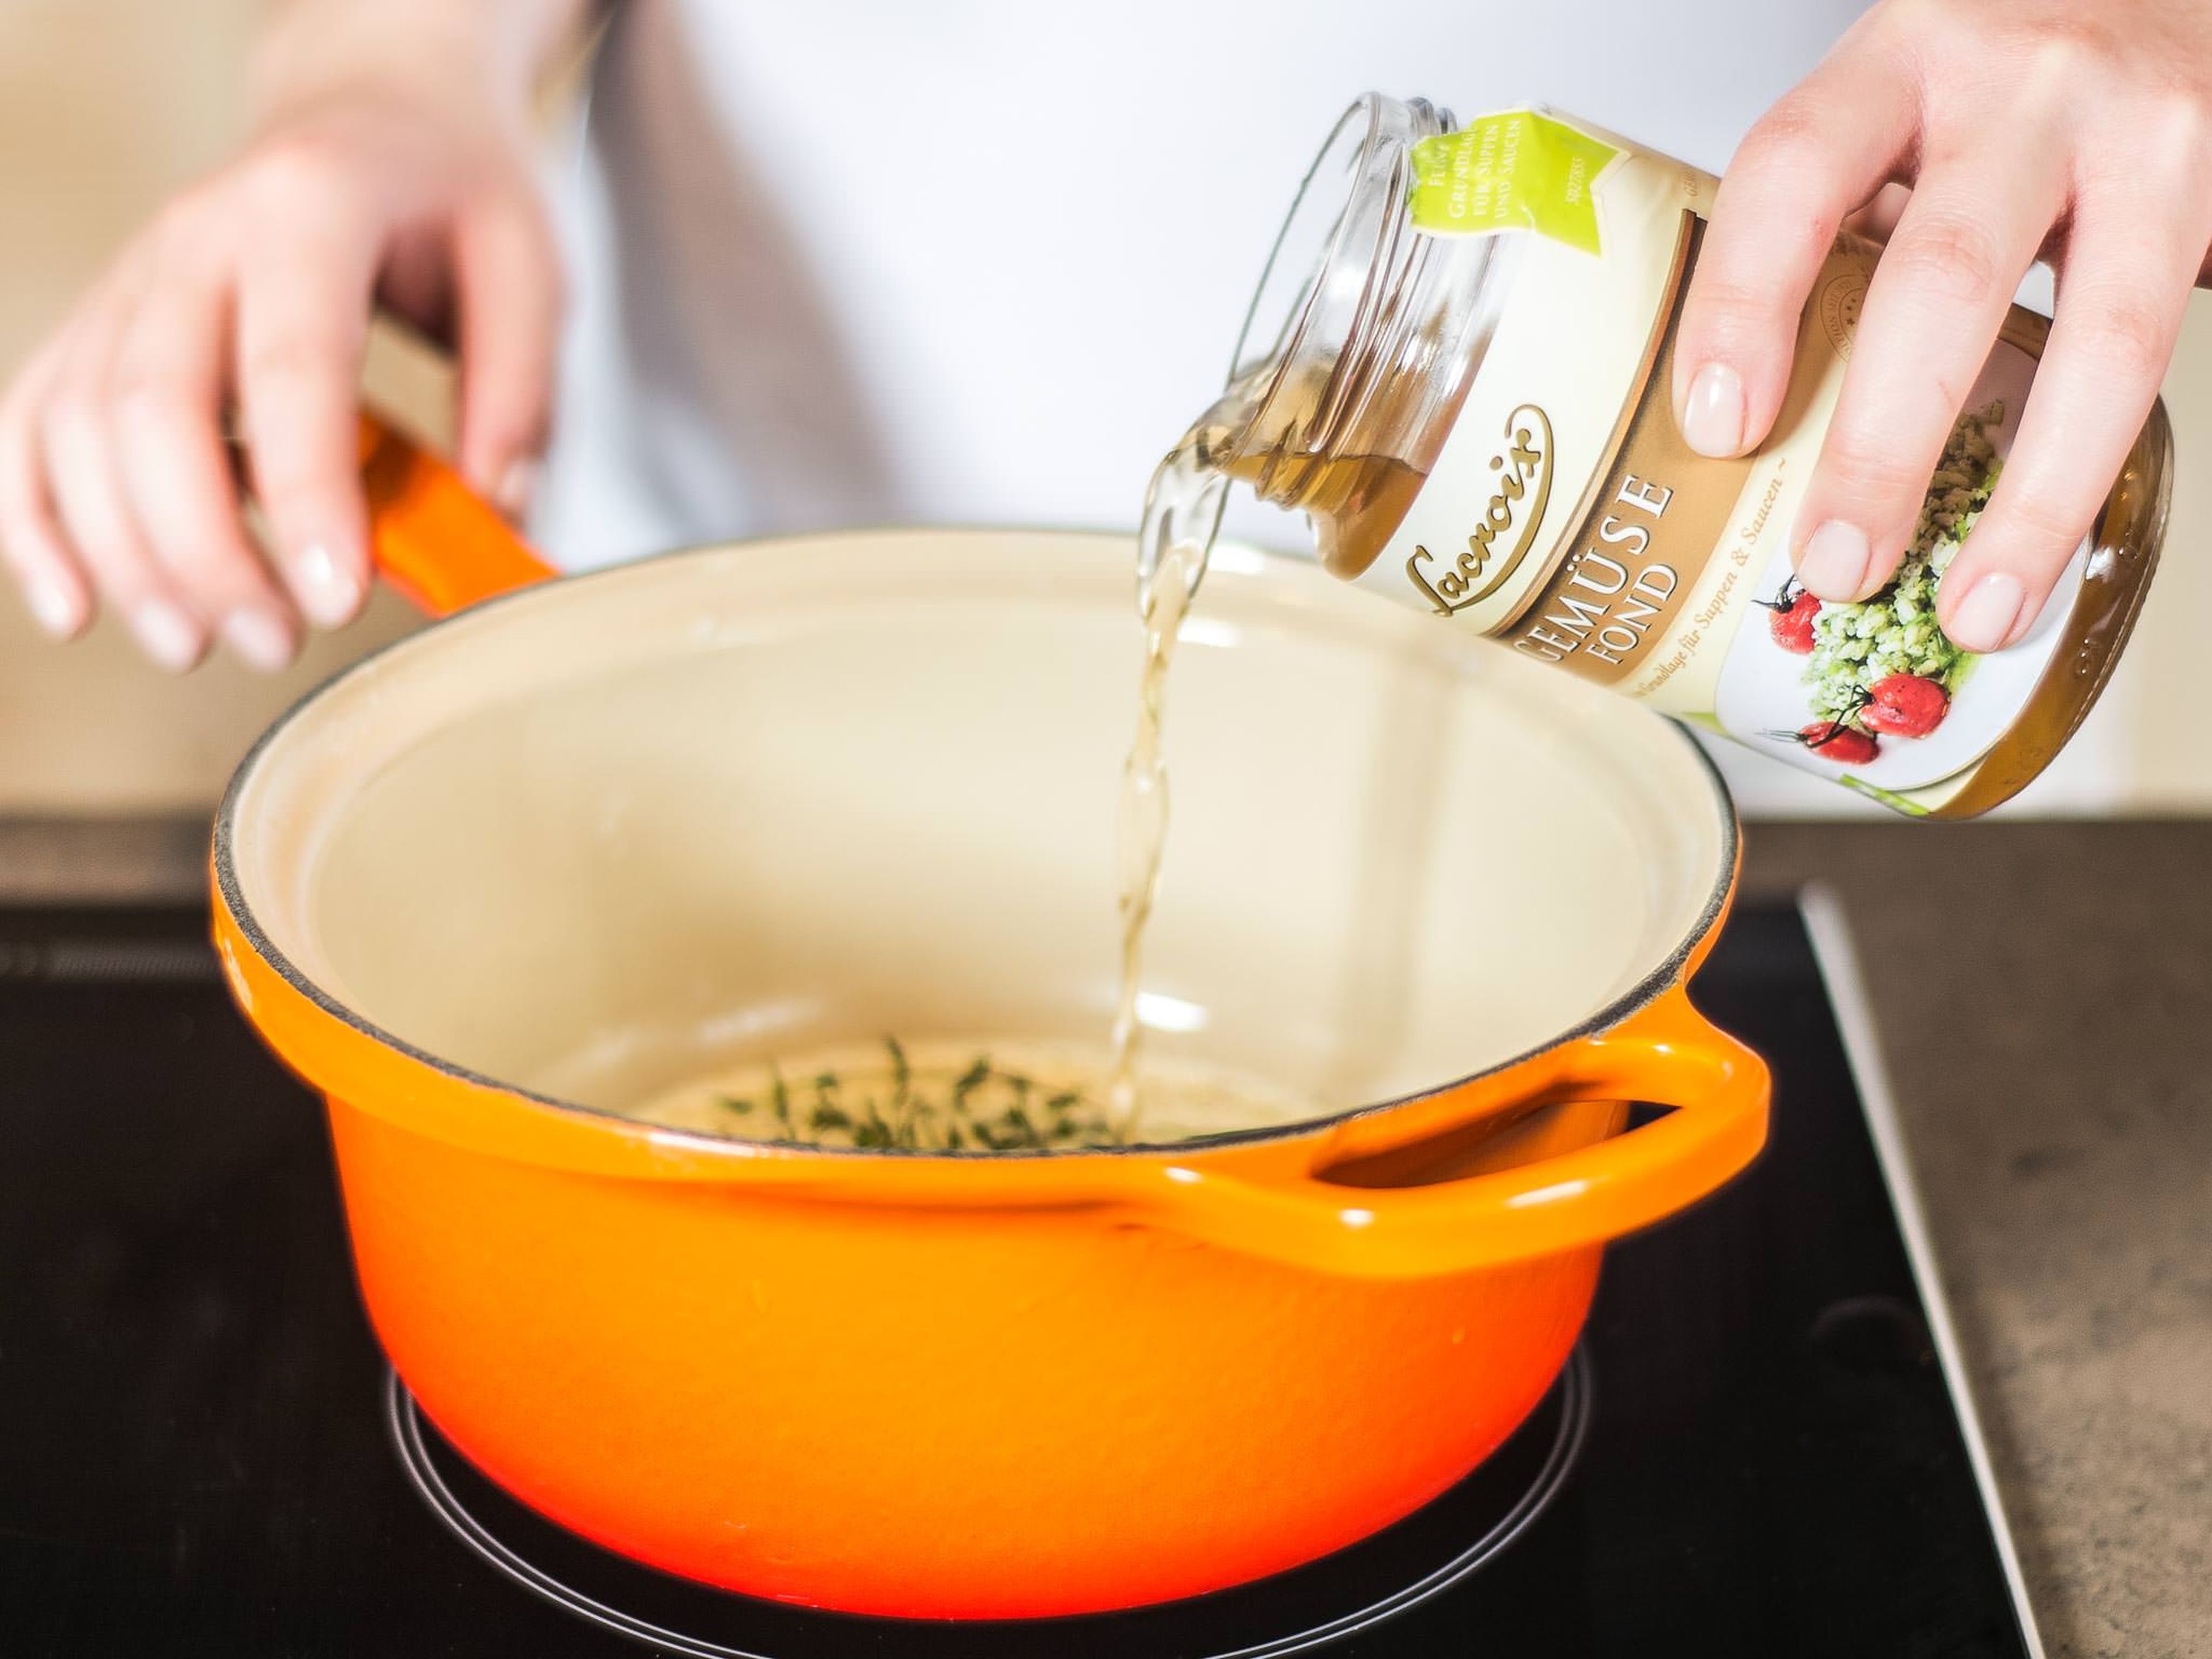 In a small saucepan, bring vegetable stock, heavy cream, thyme, and rosemary to a boil.